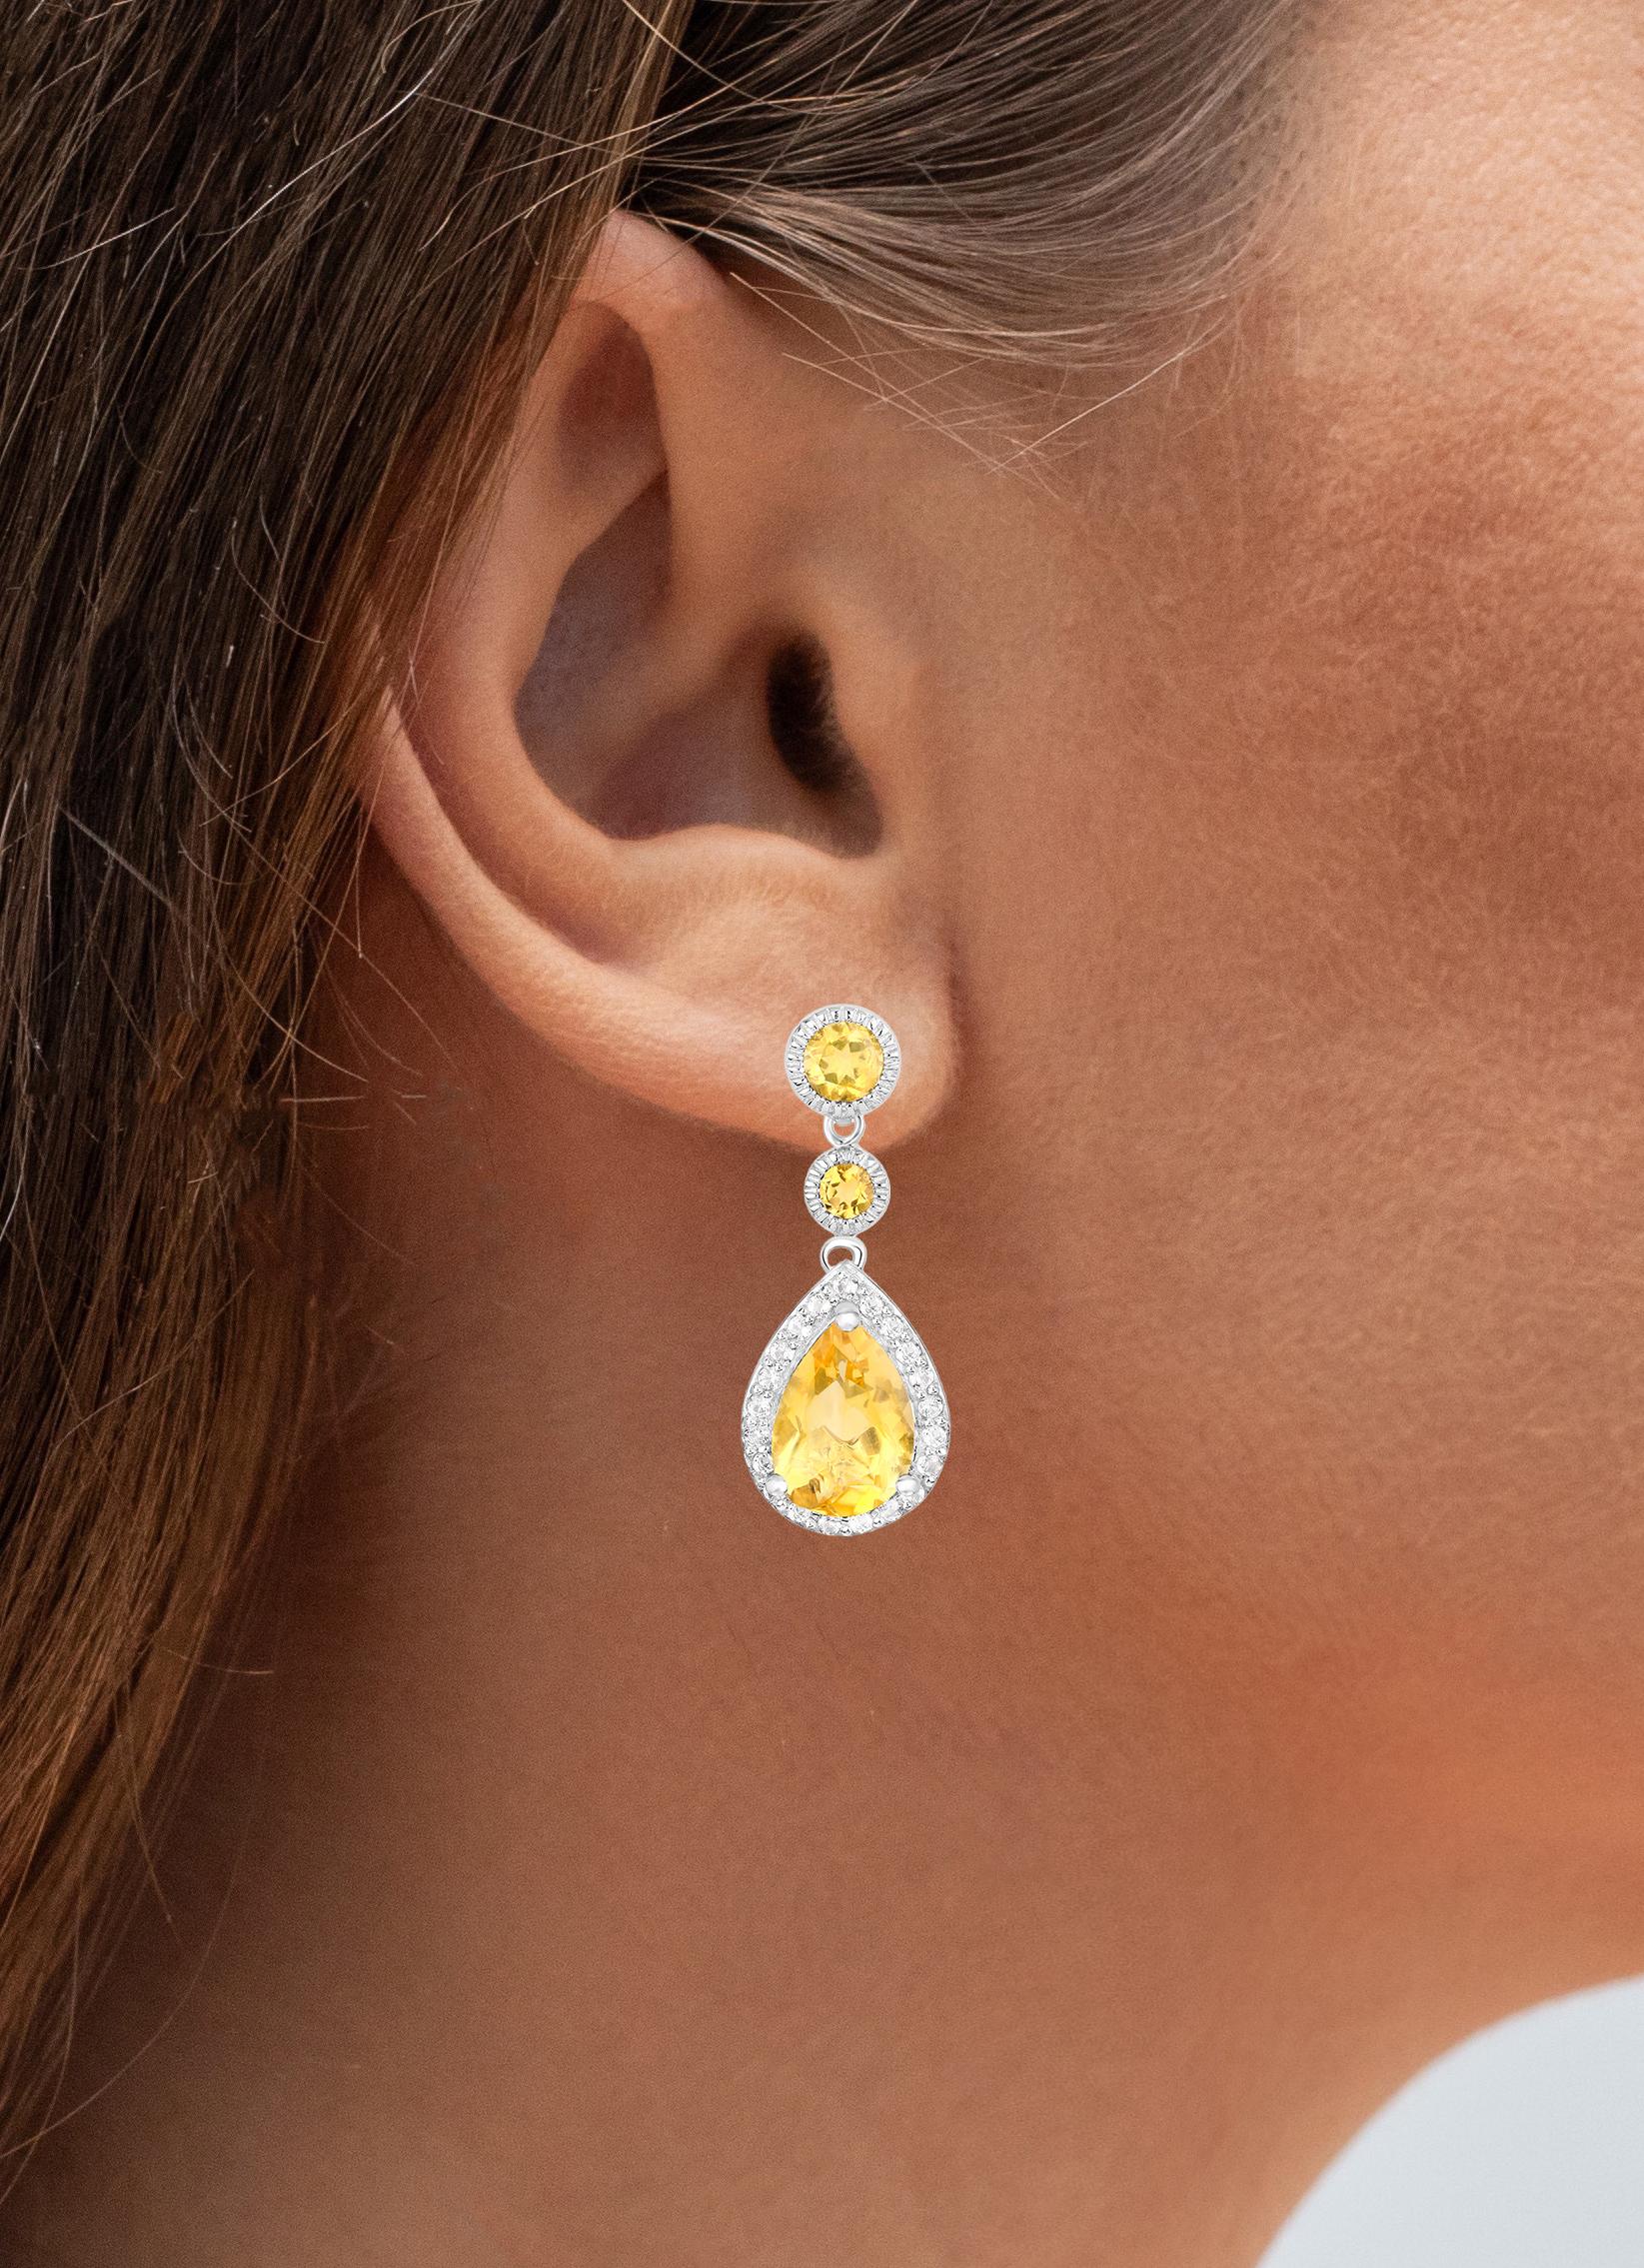 Contemporary Citrine Earrings With White Topazes 7.06 Carats Rhodium Plated Sterling Silver For Sale